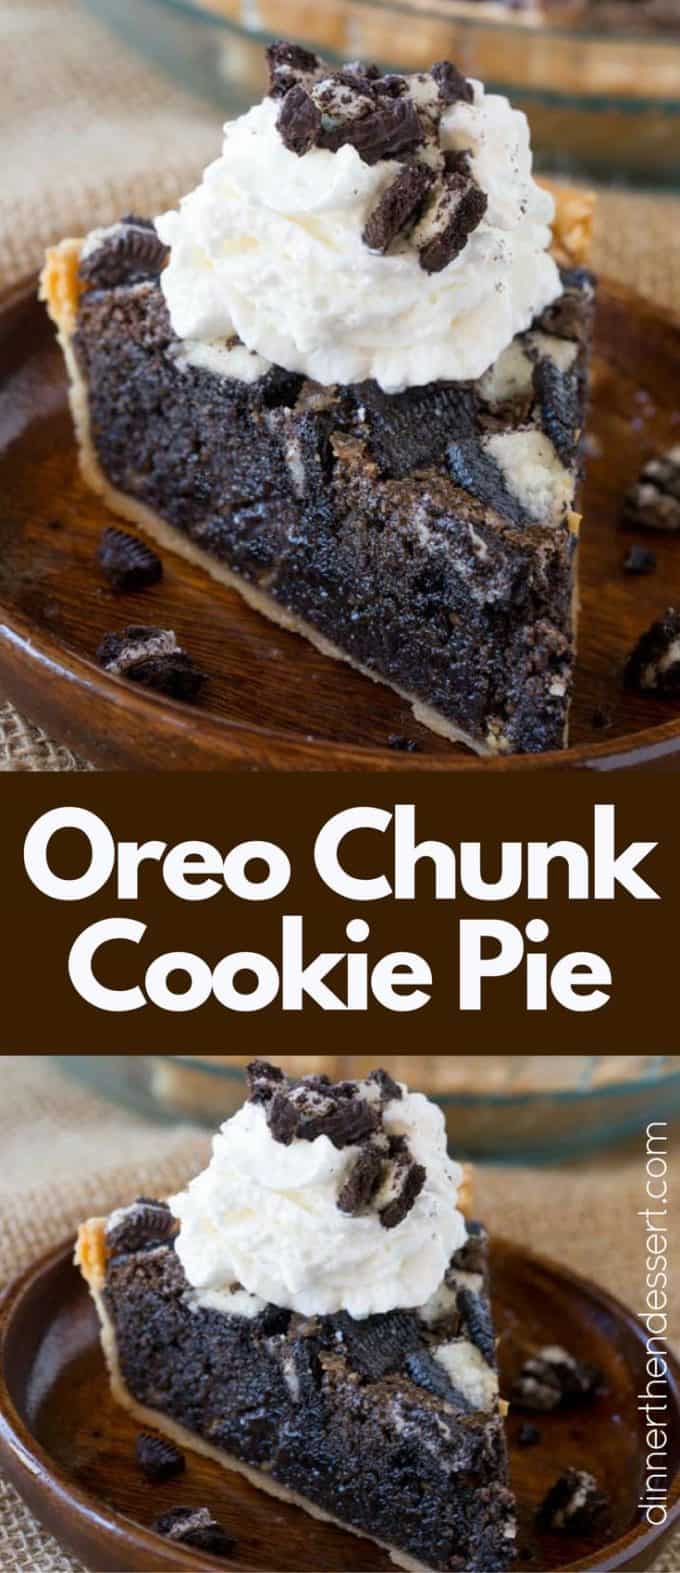 Oreo Chunk Cookie Pie taste like a delicious, melty, warm, Oreo chunk cookie baked into a buttery crisp pie crust and is soft like a cookie just out of the oven.